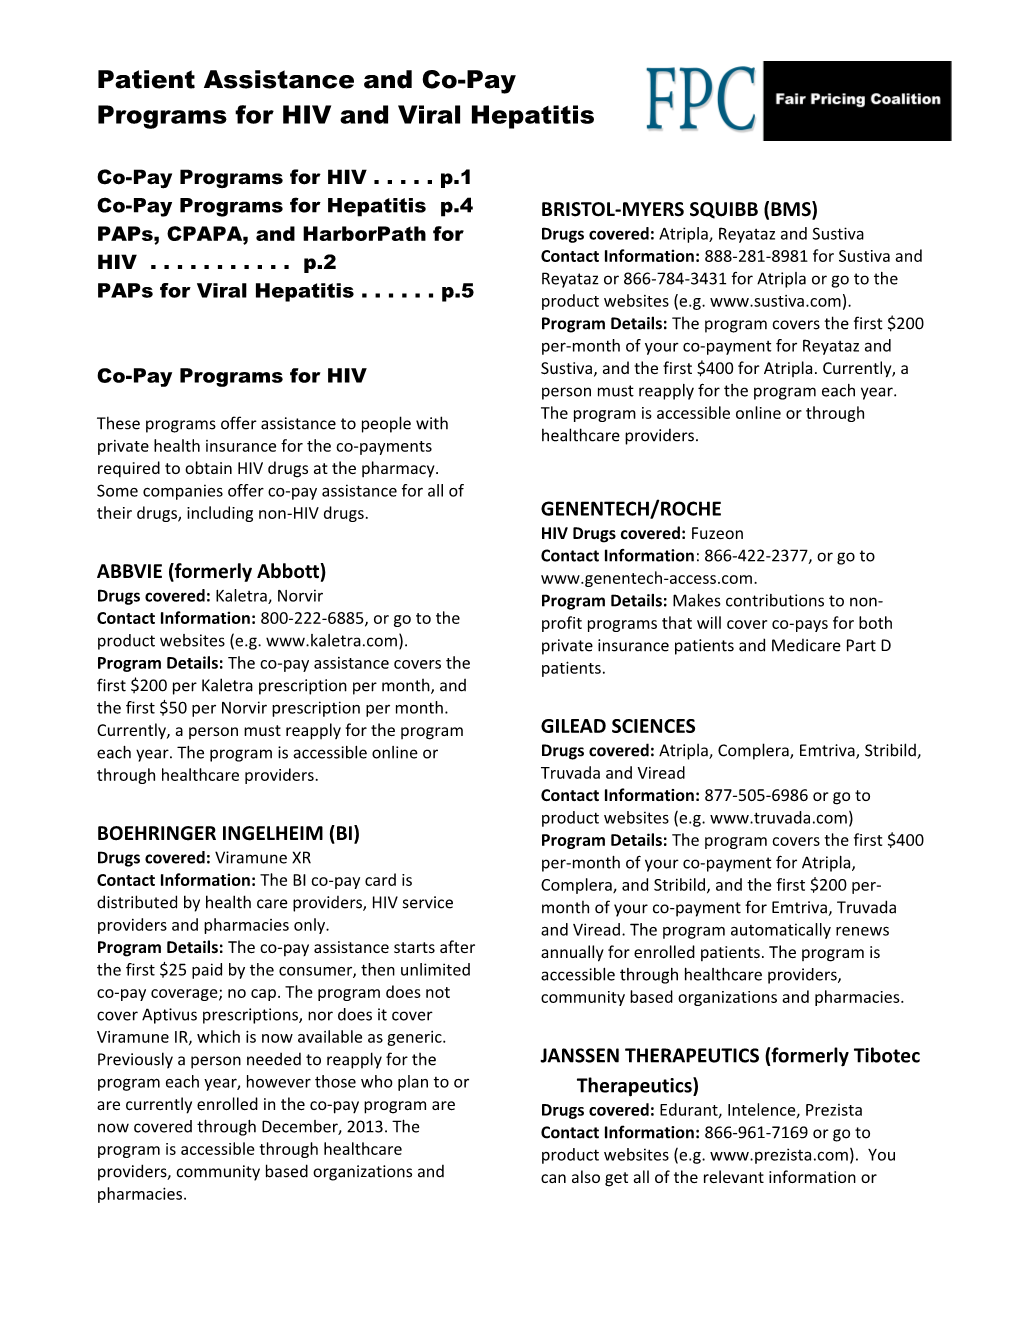 Co-Pay Programs for HIV . . . . . P.1